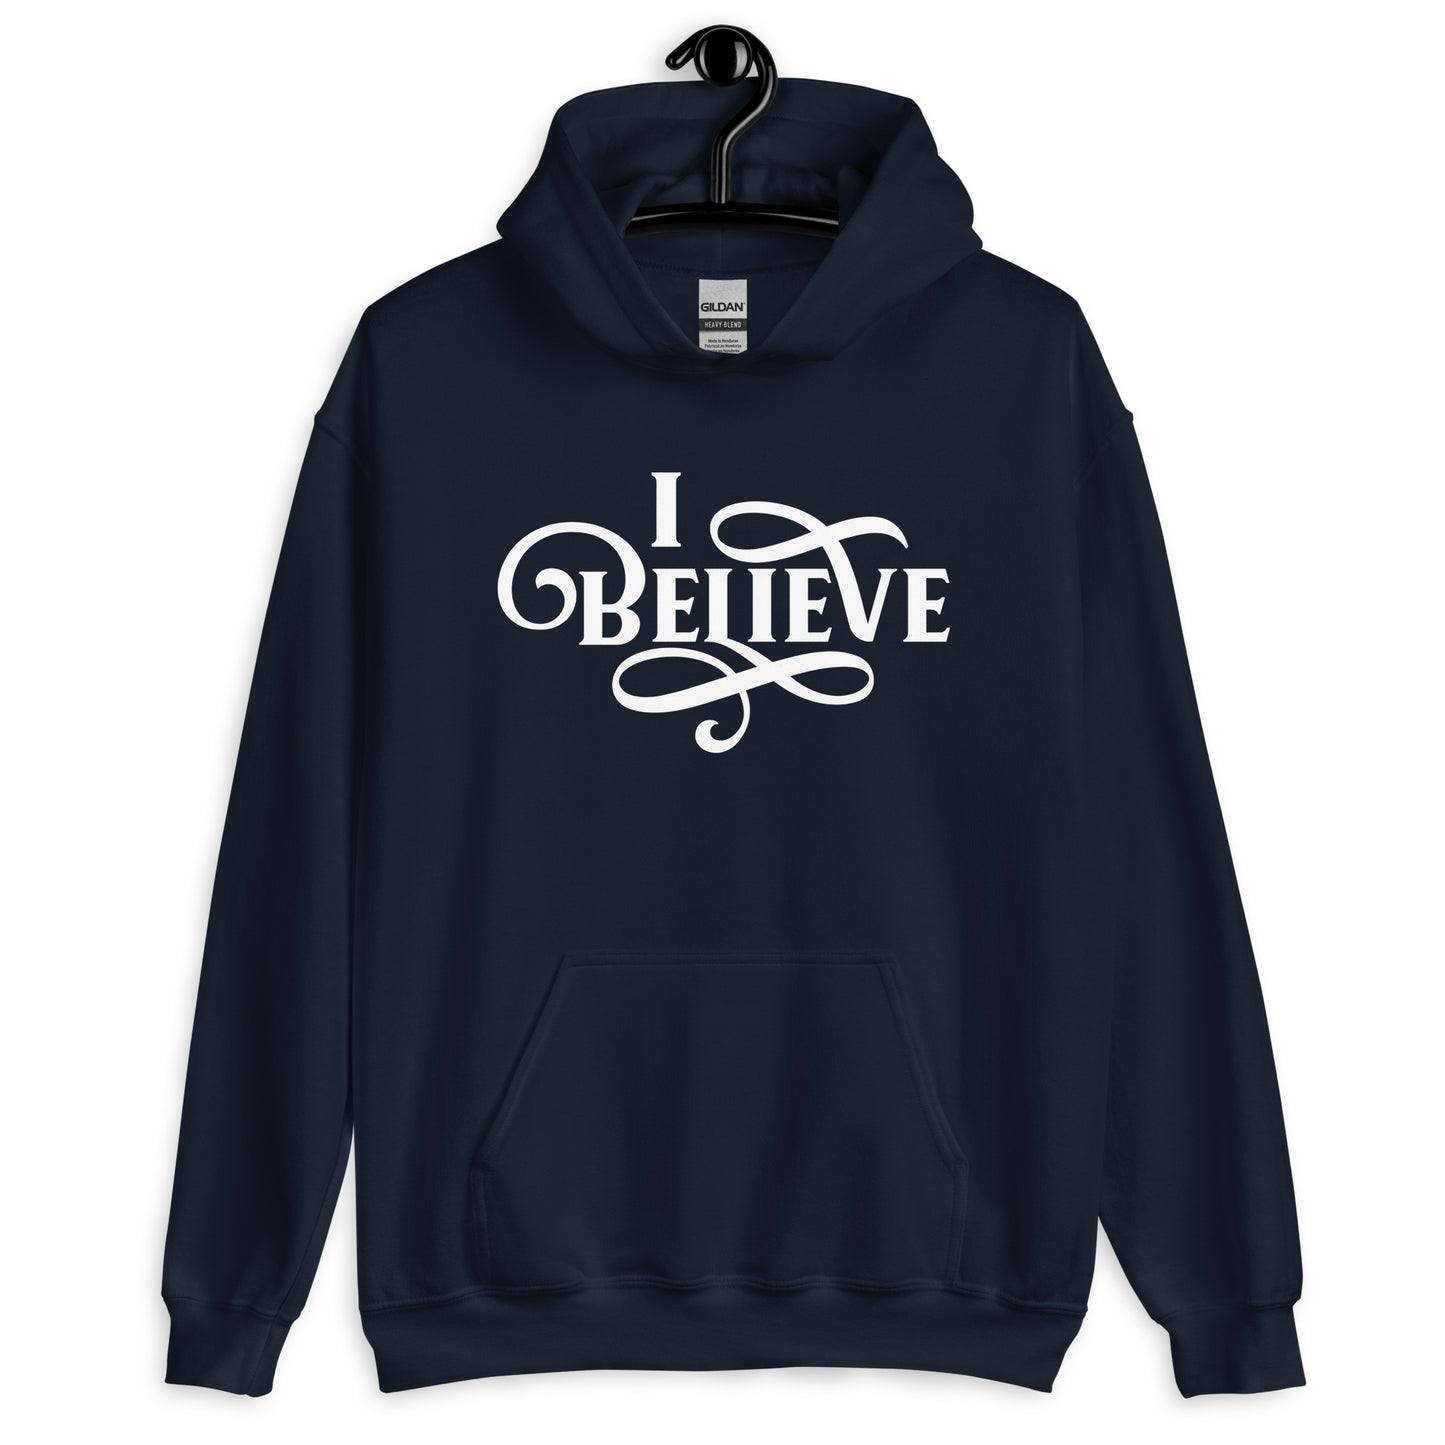 I Believe Swirl Christian aesthetic Jesus believer design printed in white on soft navy blue unisex hoodie sweatshirt for women, great gift for her